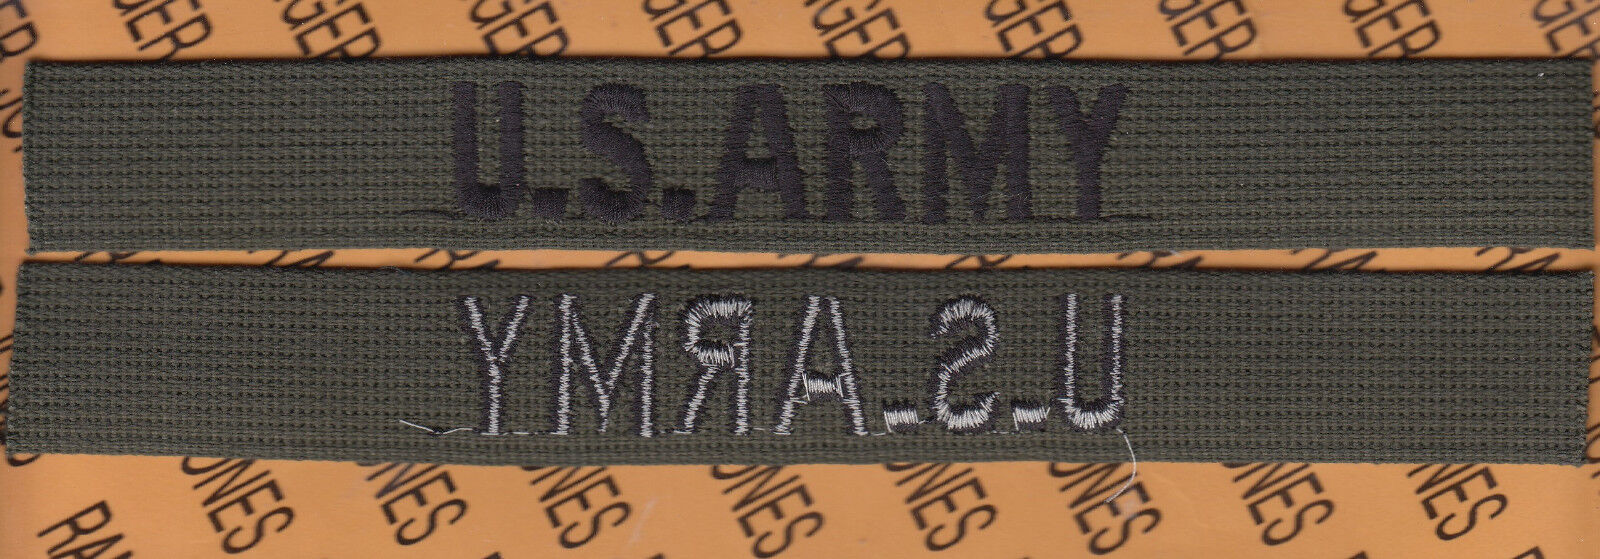 US Army full embroidered Name tape cloth OD Green & Black sew on patch 